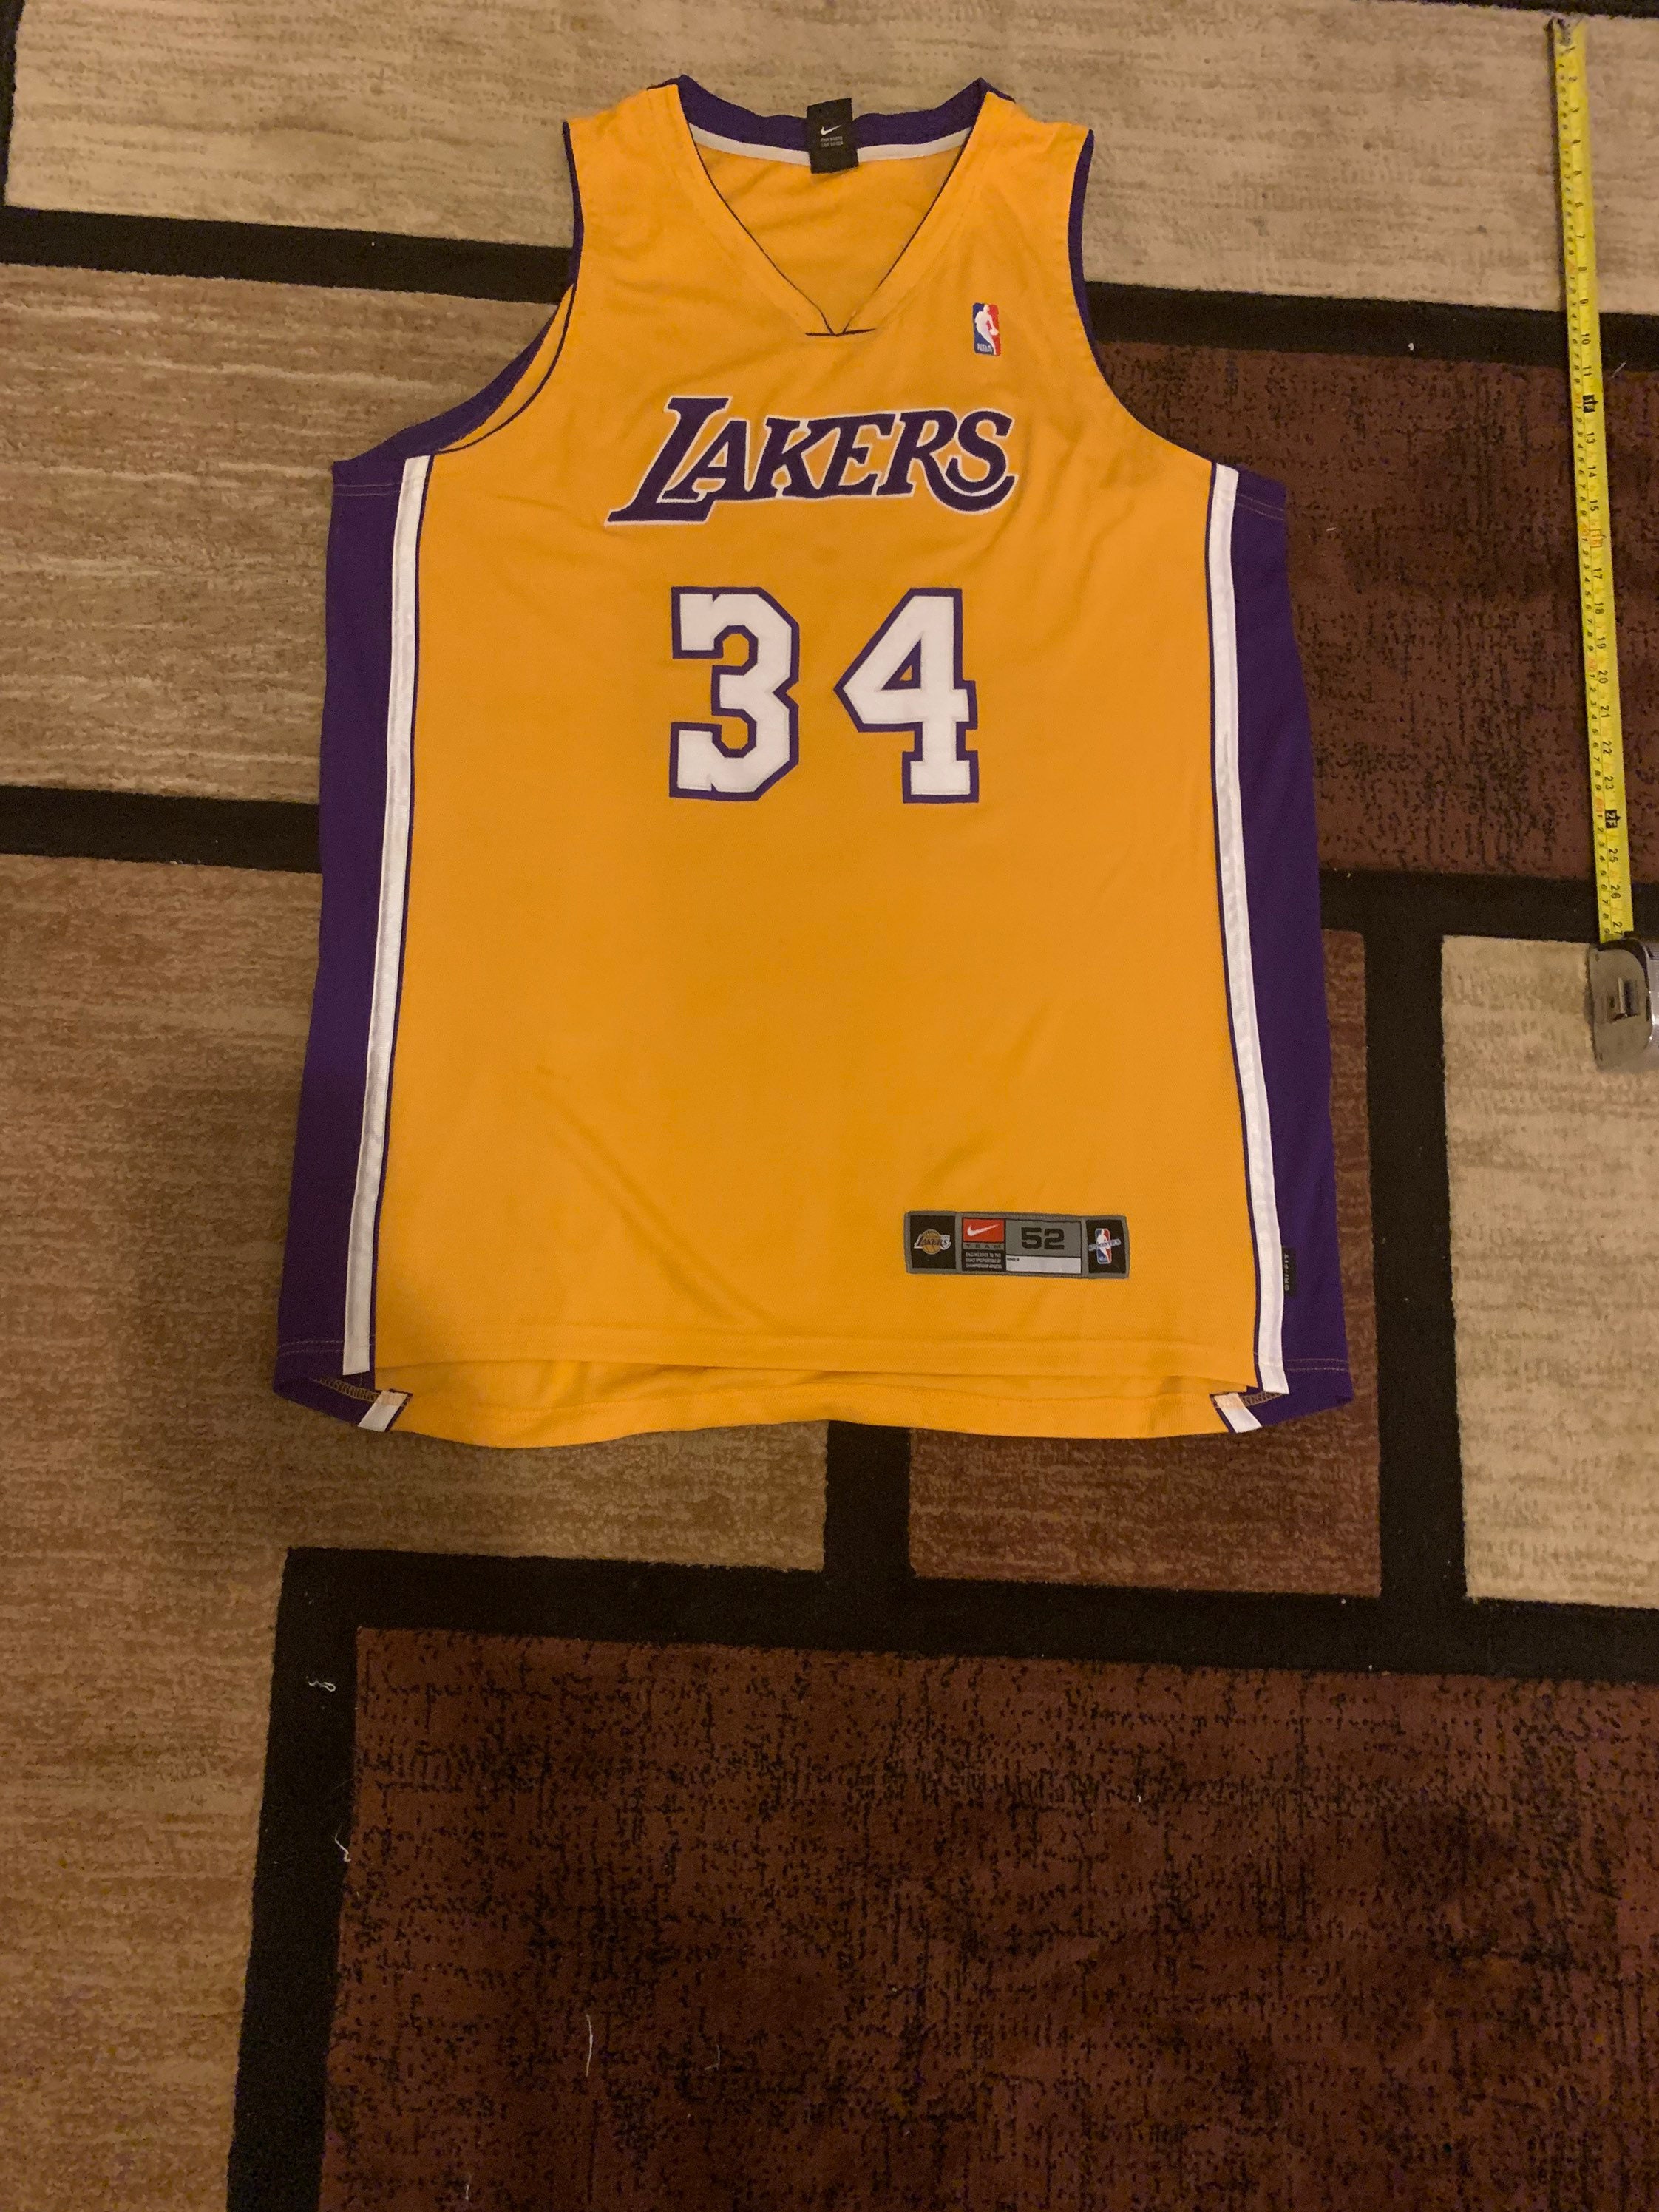 Nike NBA All Star Game LA Lakers Shaquille O'Neal #34 Jersey Size XXL.